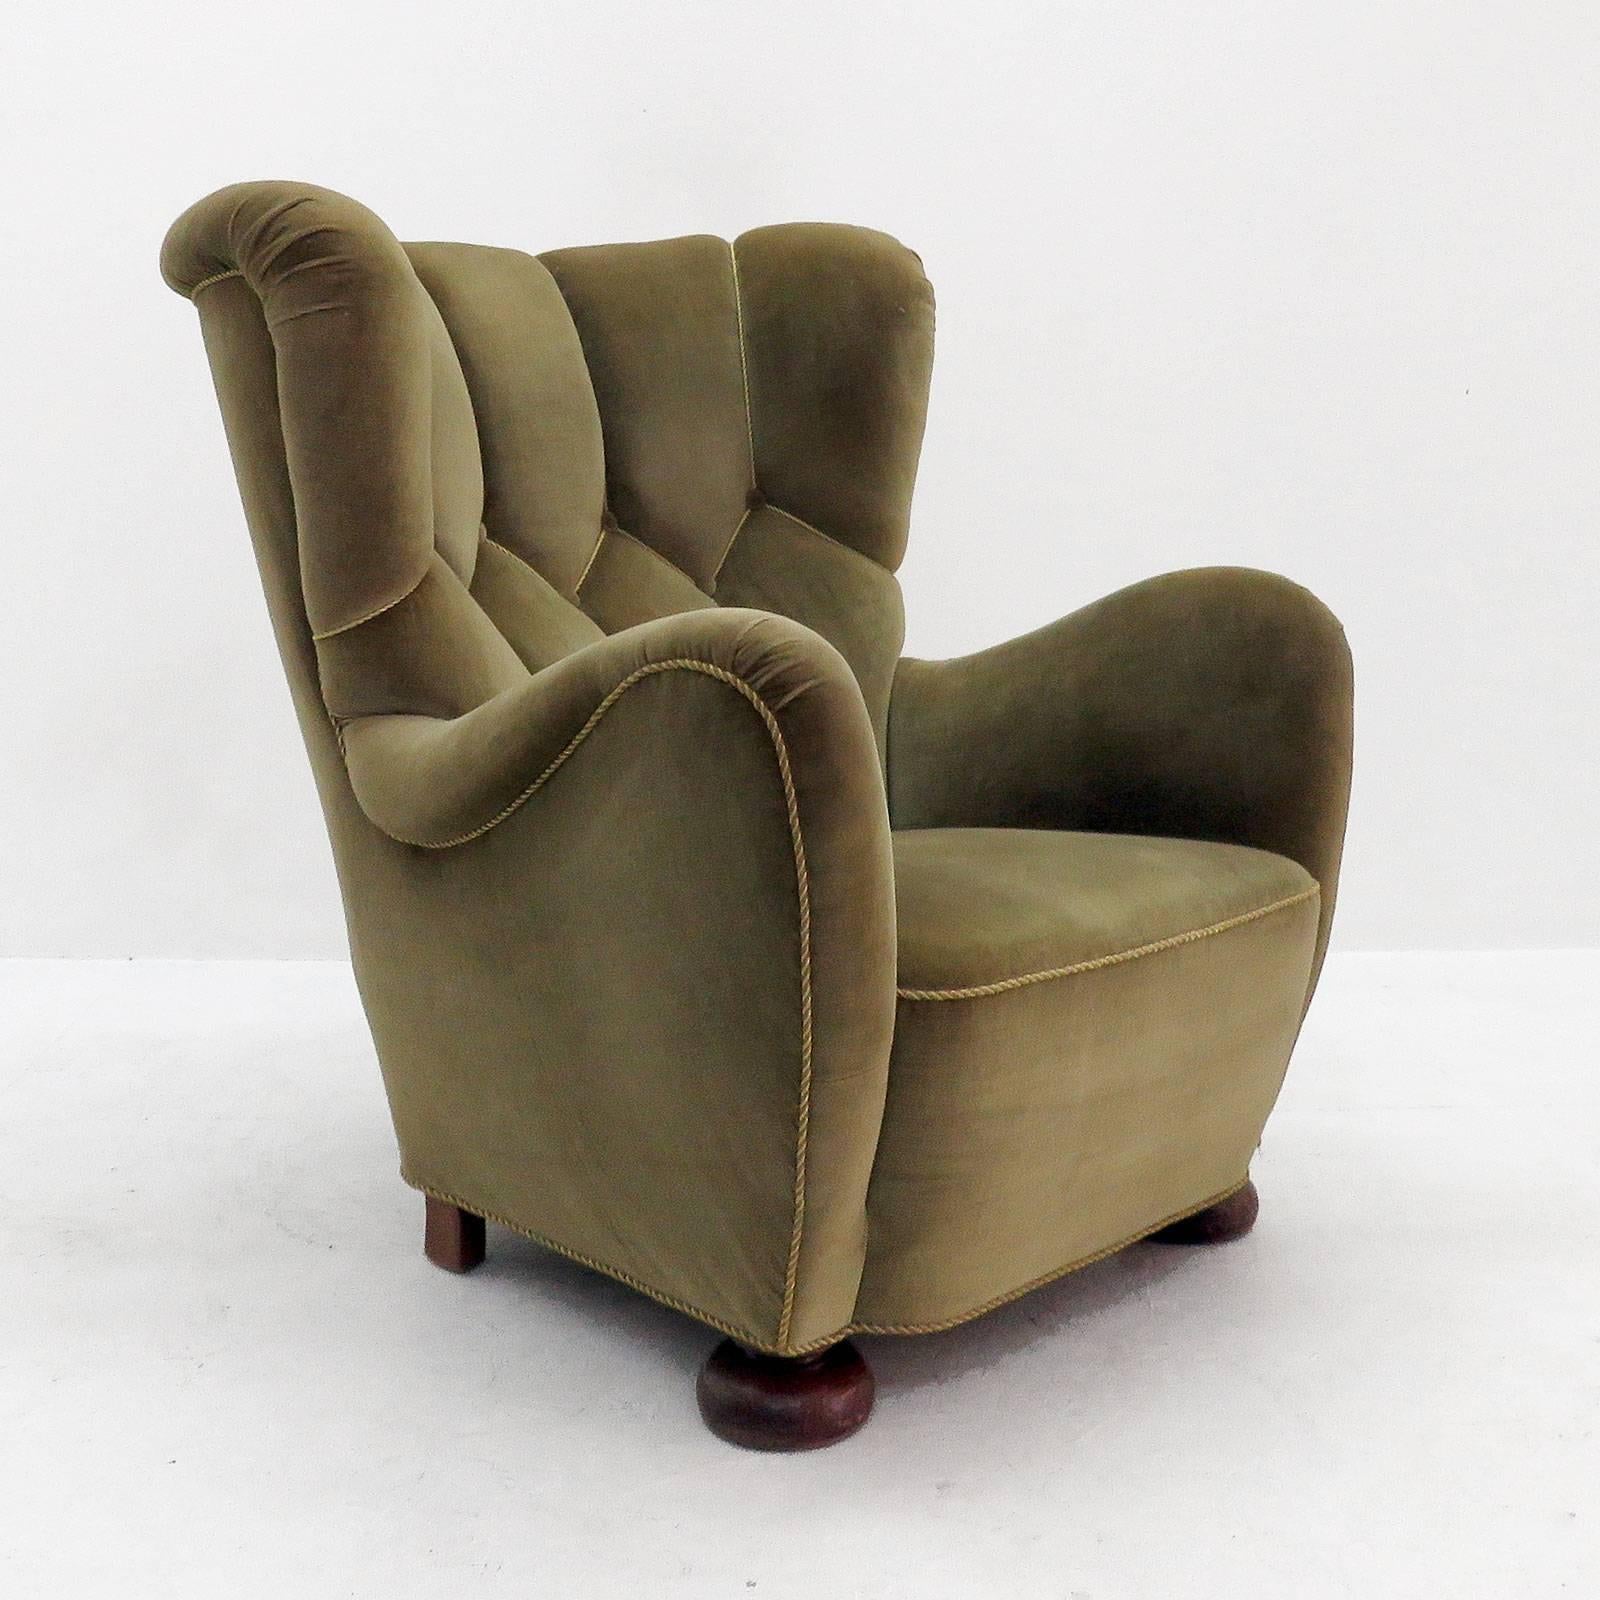 Wonderful, highly comfortable 1950s high back armchair in style and quality of Frits Henningsen, in original mohair upholstery on spring supported seat and tufted, buttoned slightly winged back.